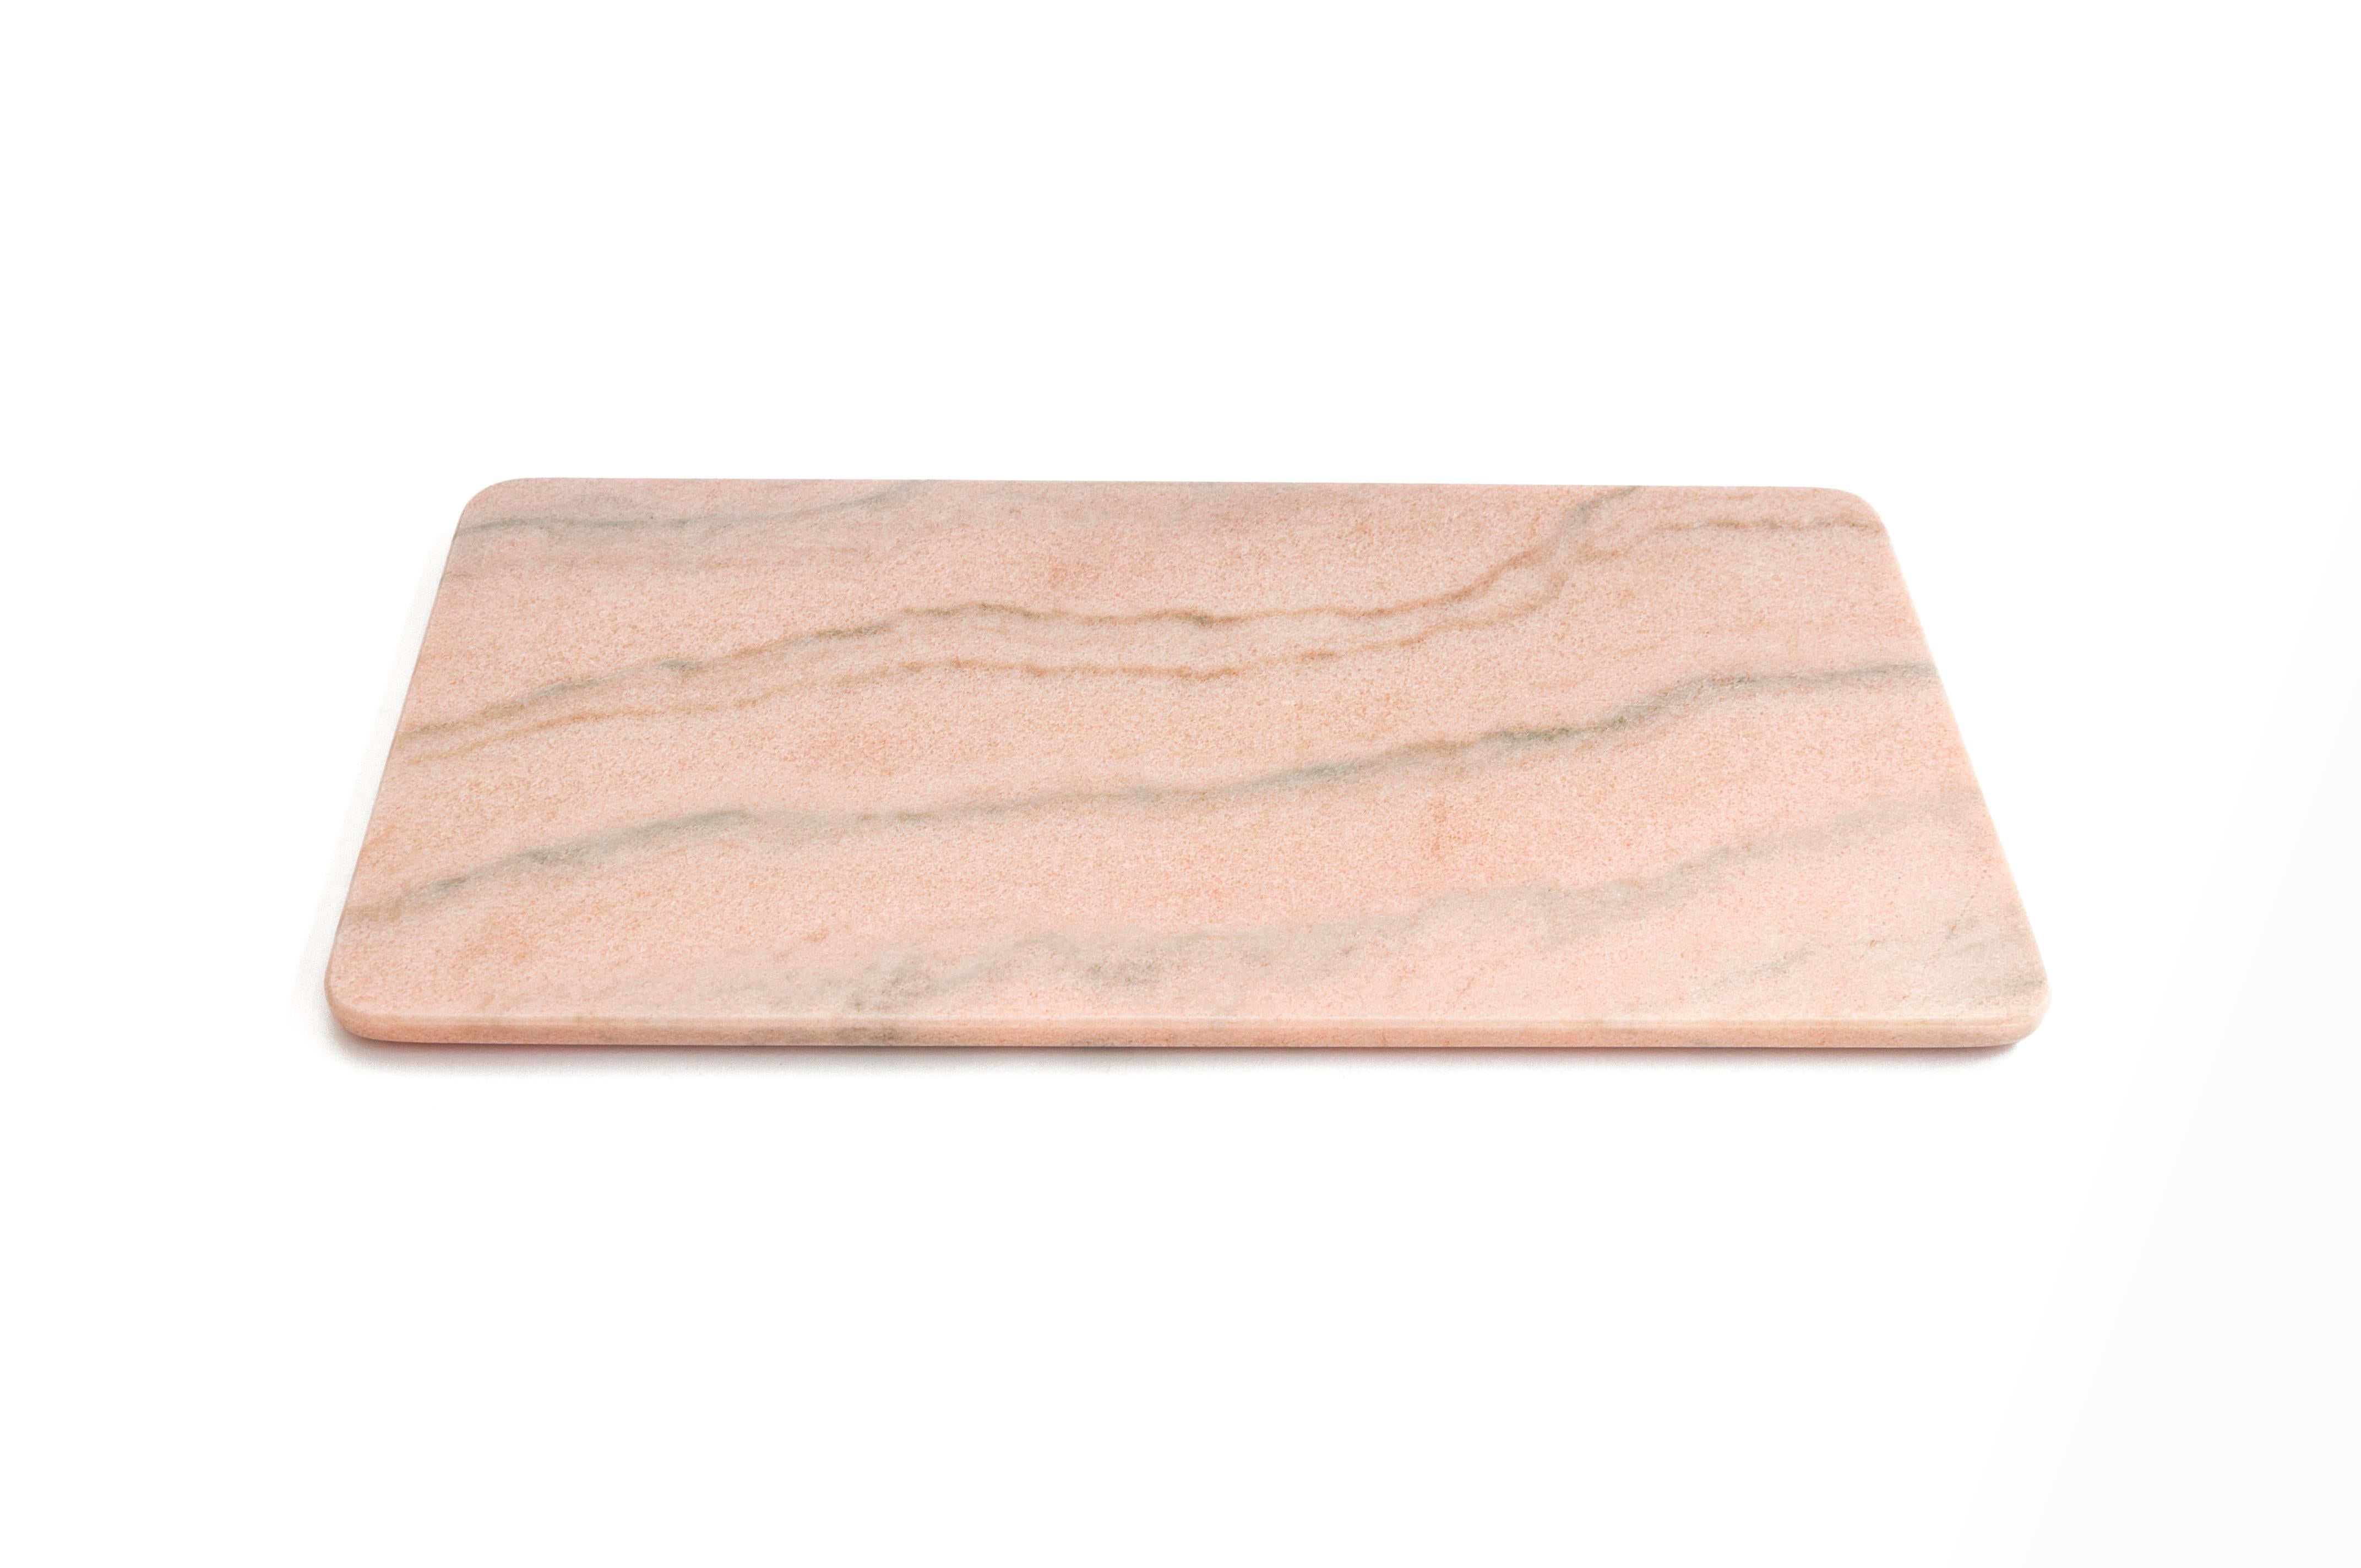 Canapè - cheese plate - sushi plate - serving dish in pink Portugal polished marble.

Ideal for spa, hotel, restaurant and to serve food in a very sophisticate plate in your house. It can be used also as a nice display of sweets and